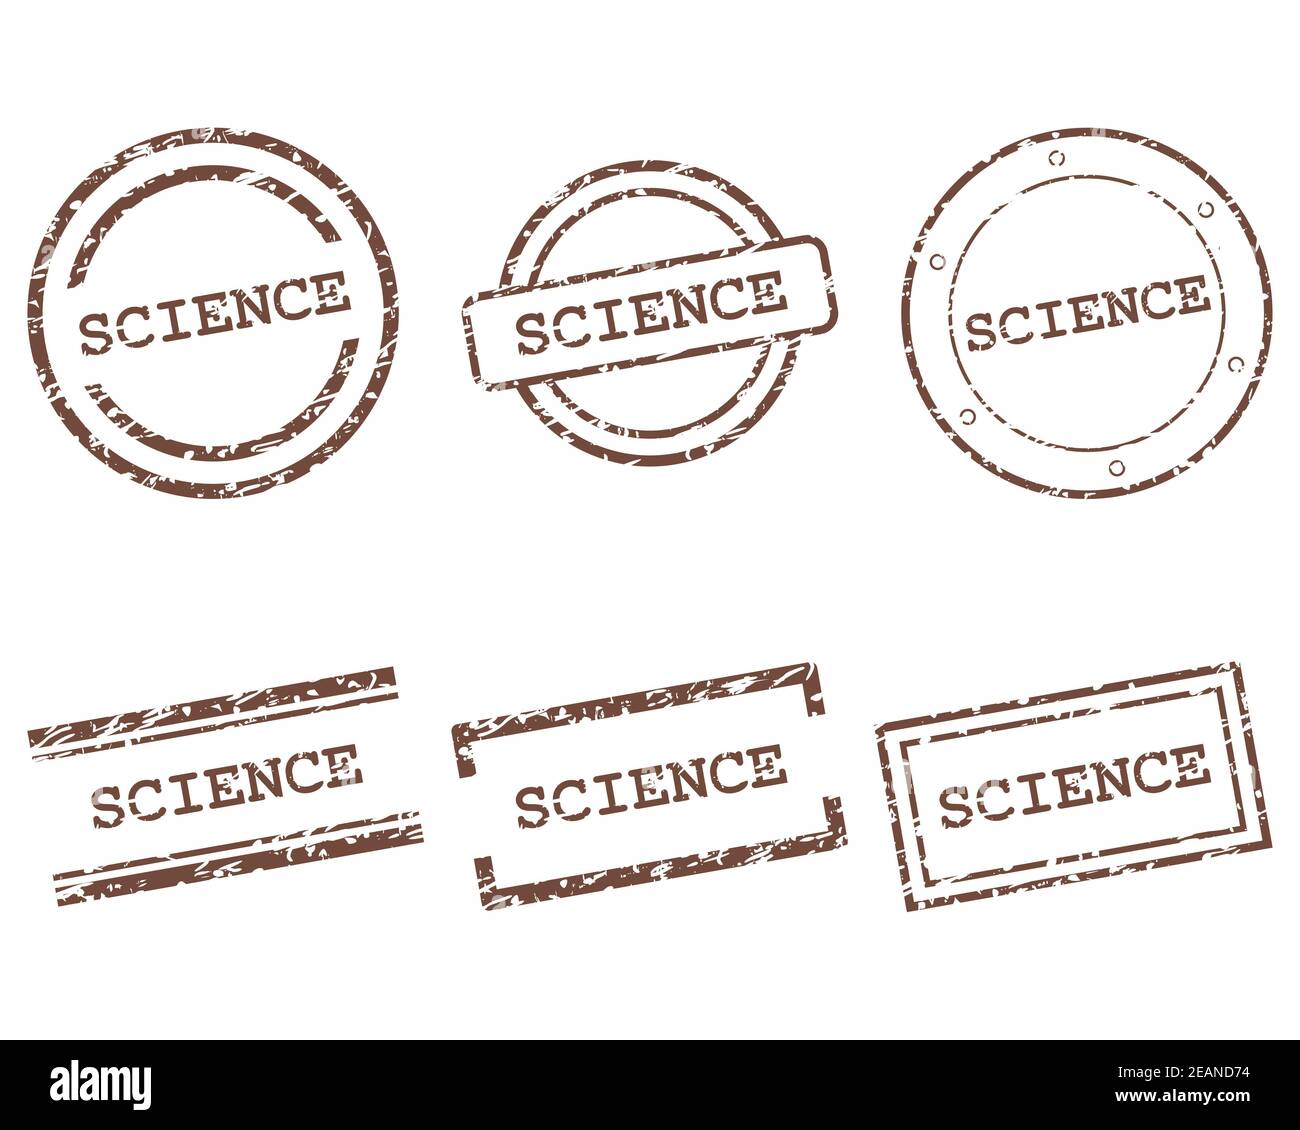 Science stamps Stock Photo